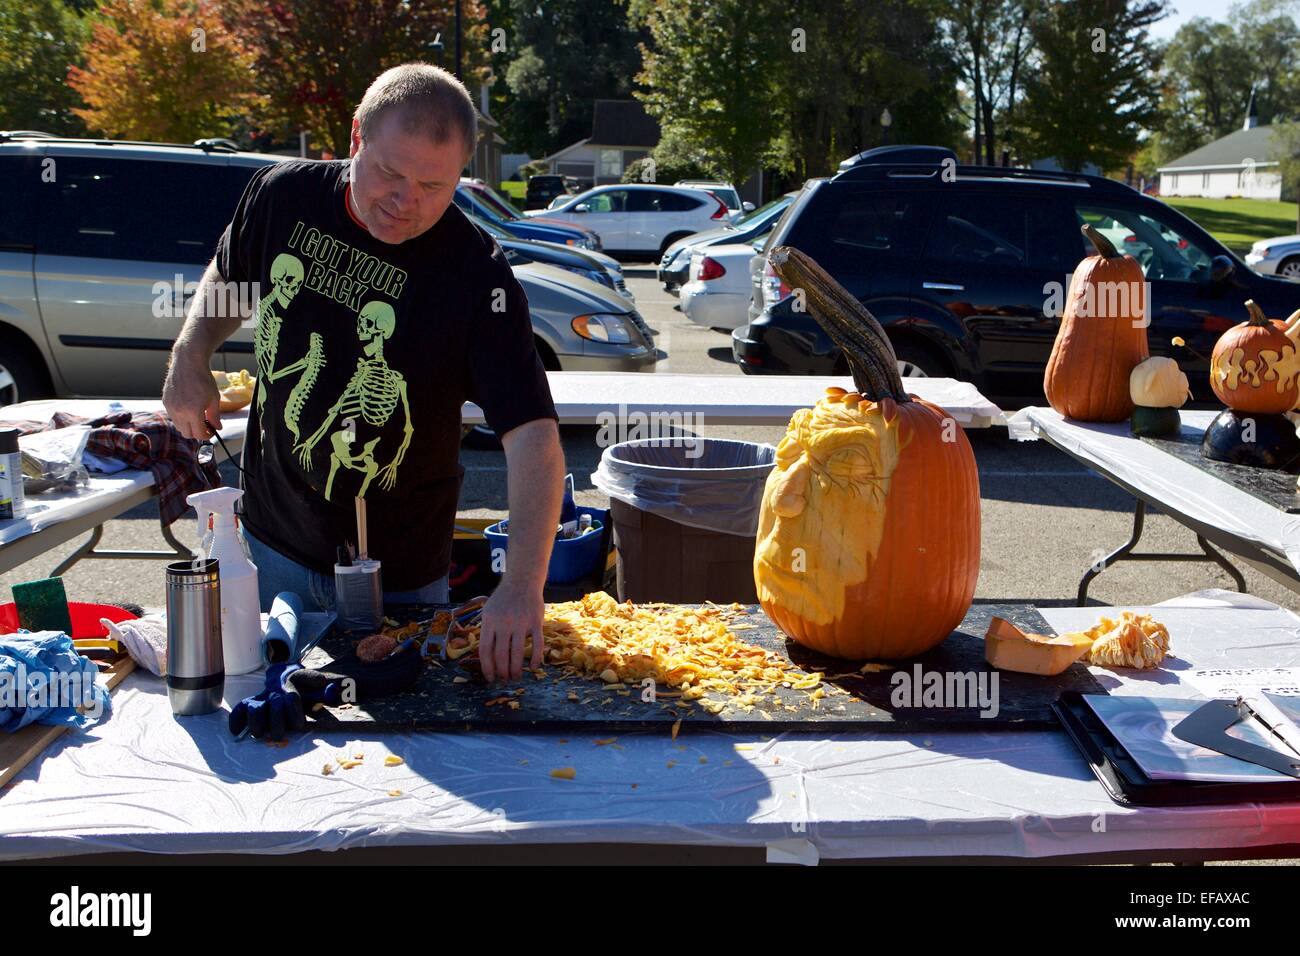 Man working on carving a pumpkin Stock Photo